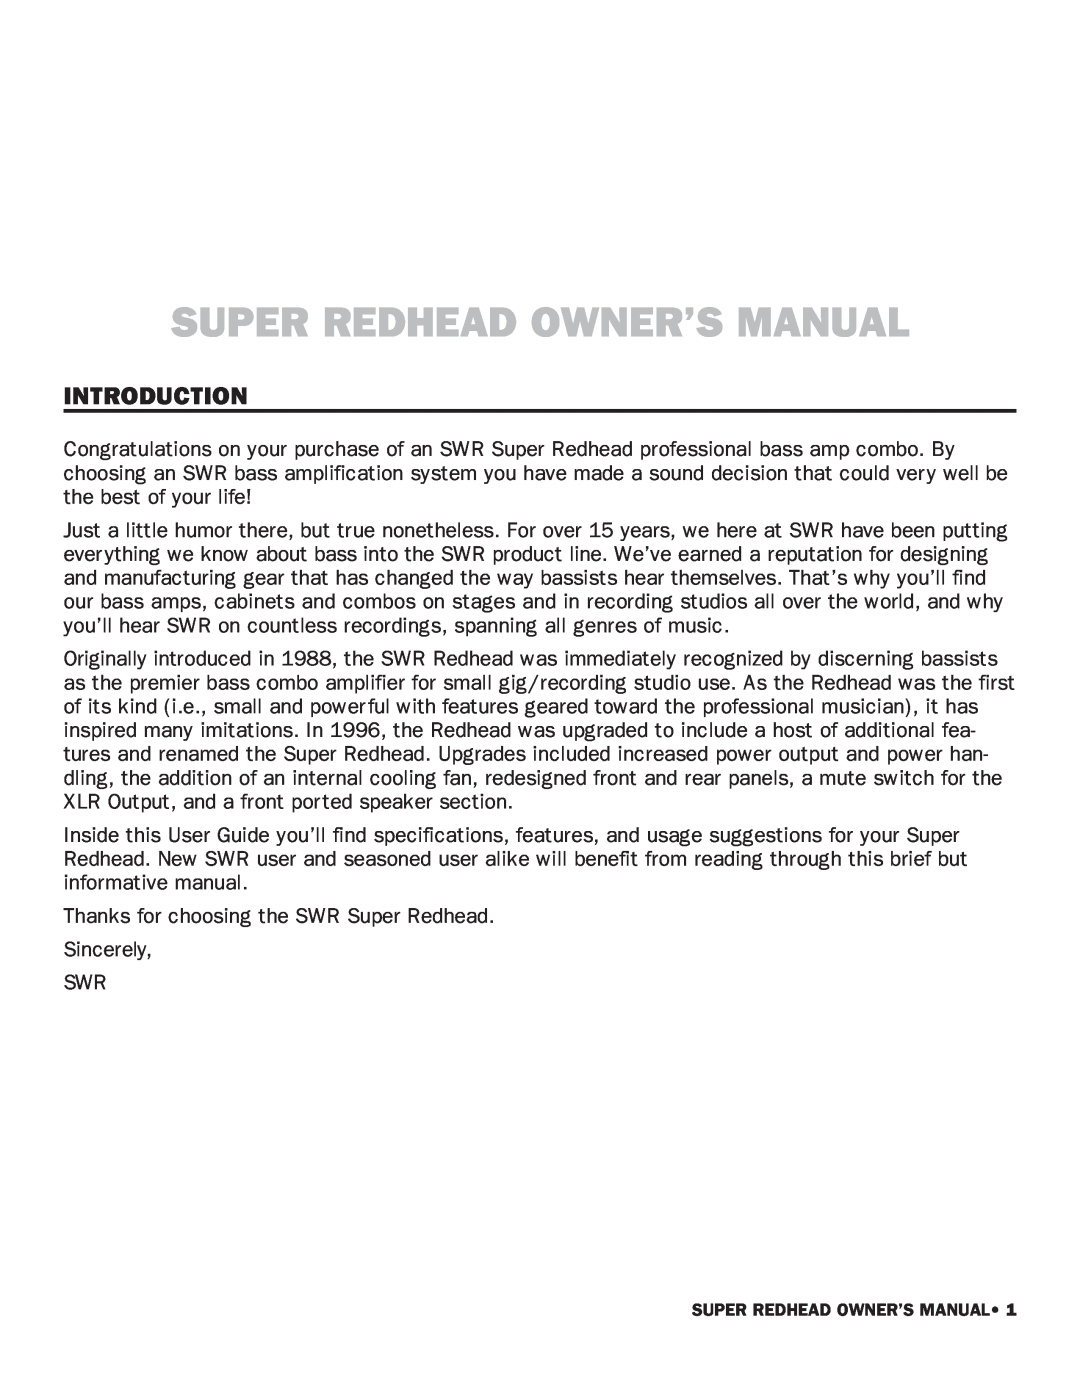 SWR Sound Super Redhead owner manual Introduction 